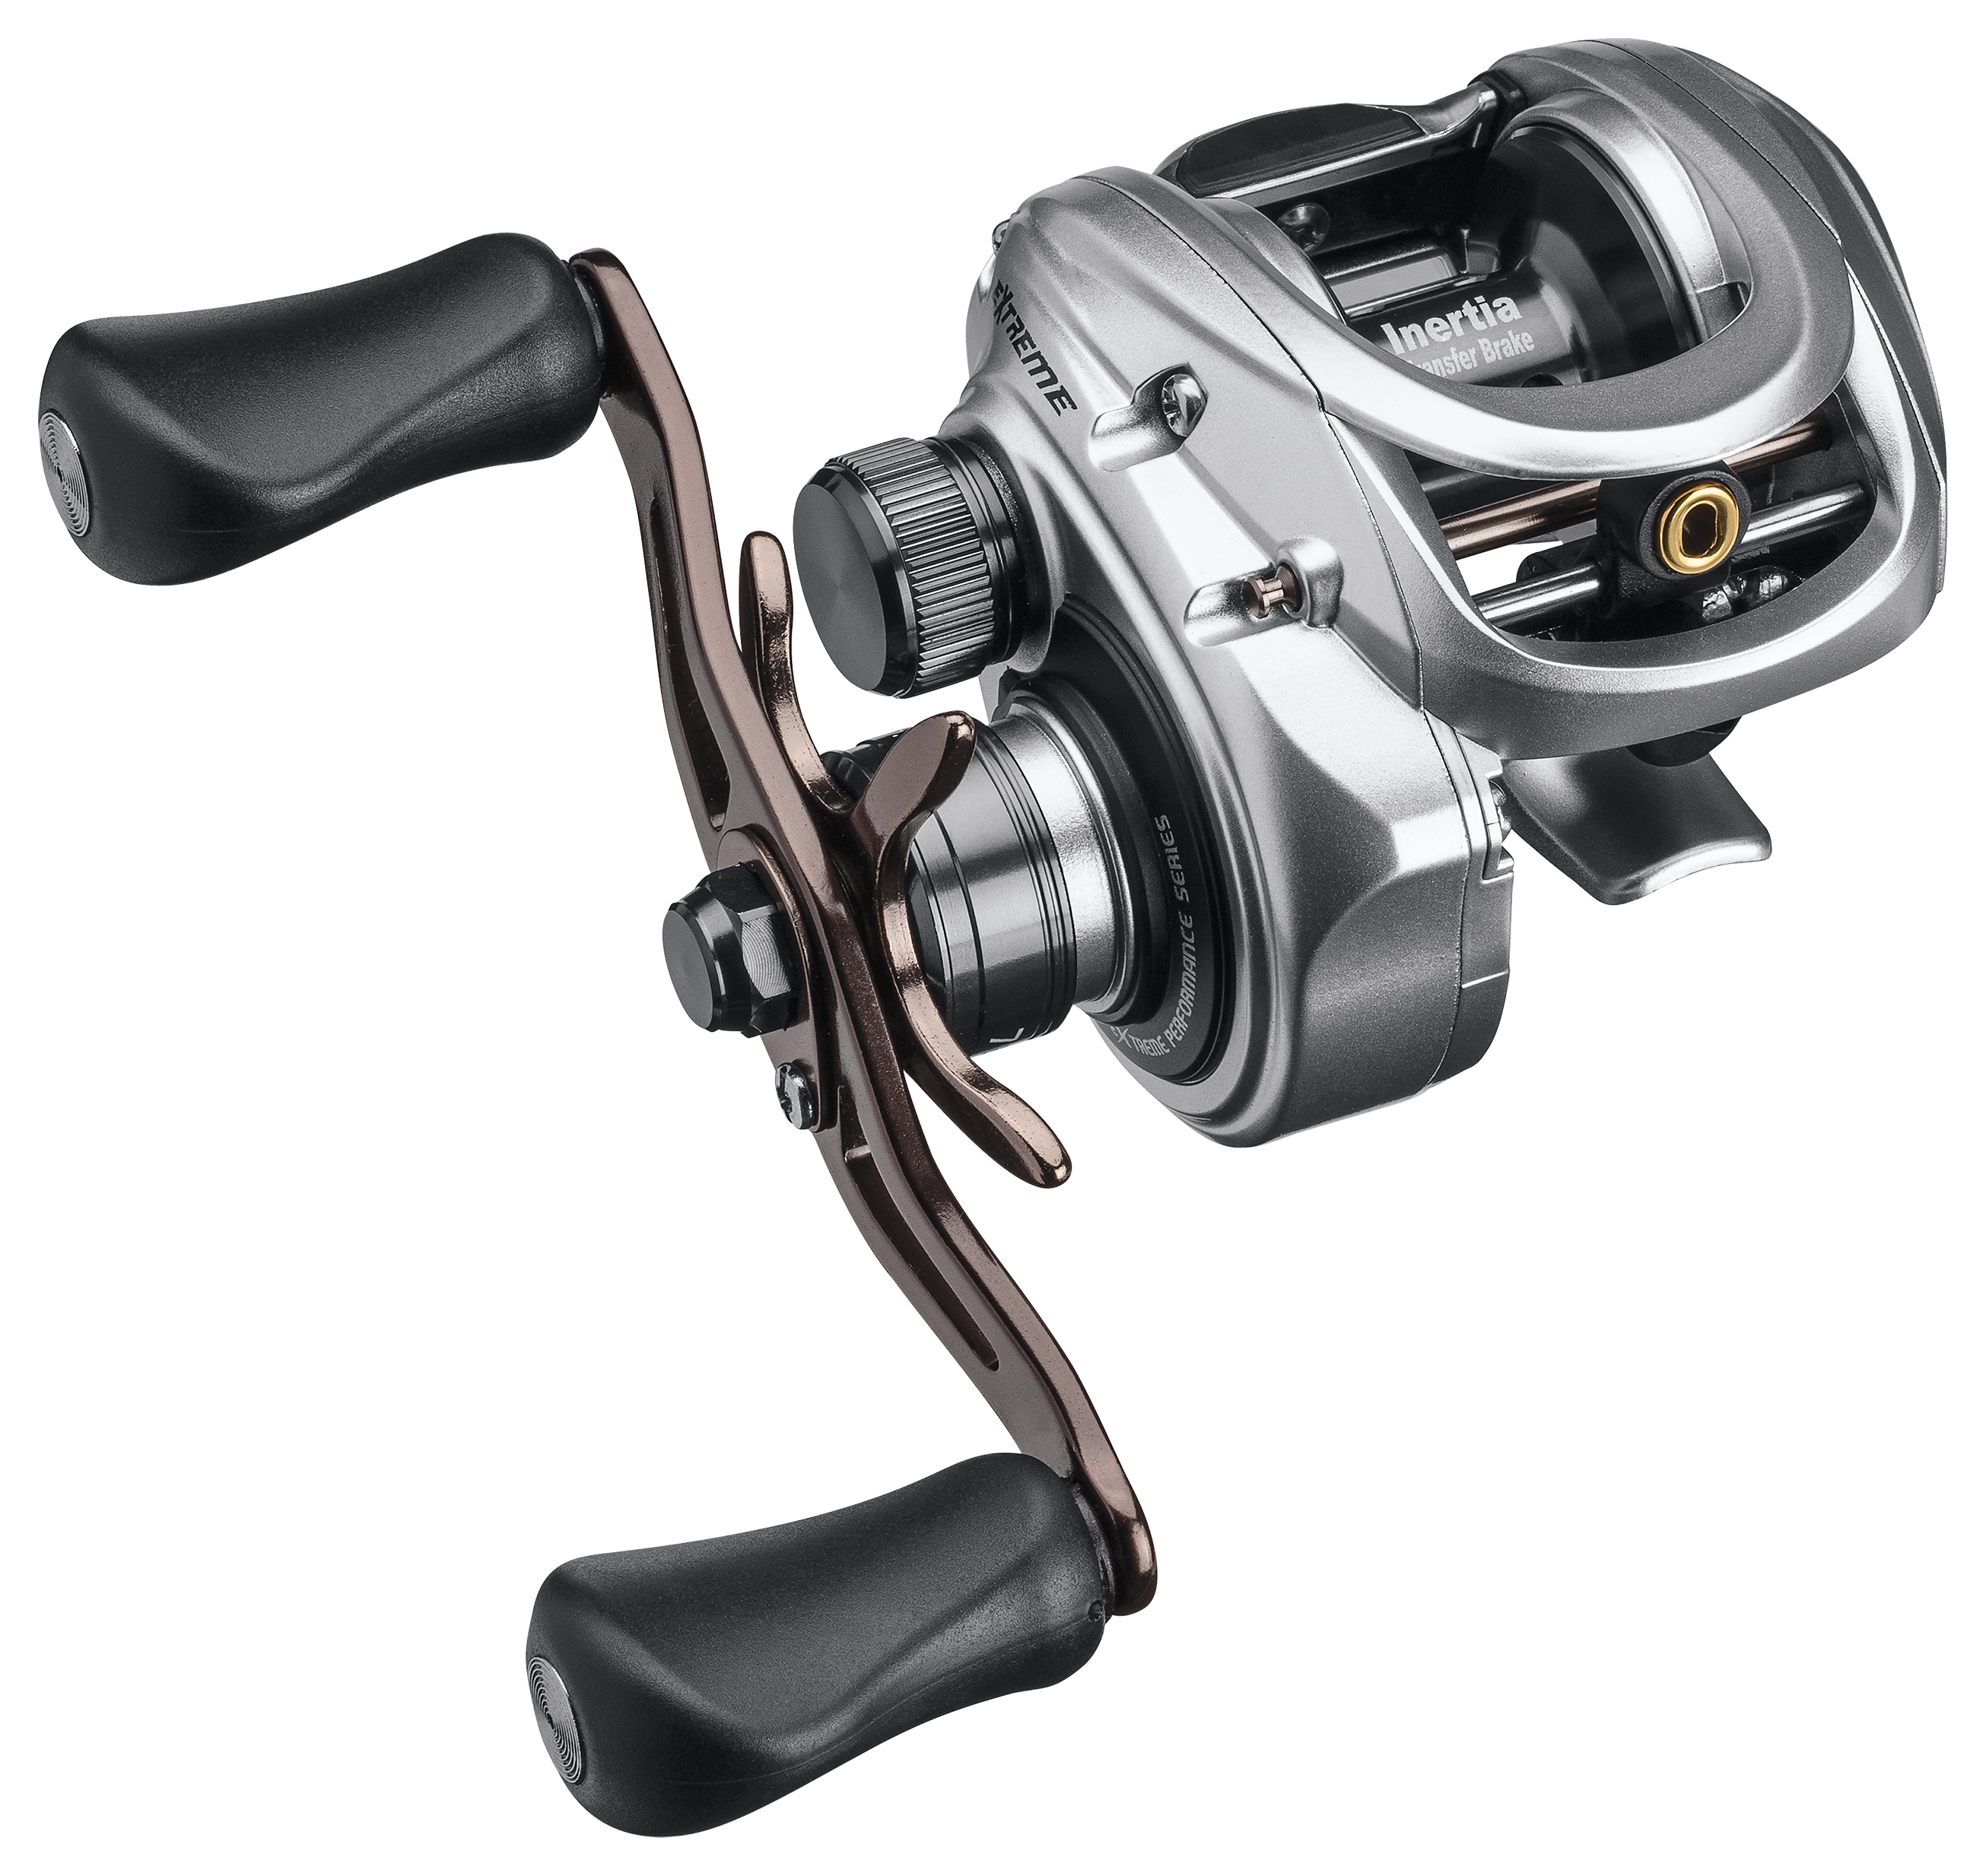 Bass Pro Shop EXTREME ETR3000 Spinning Reel